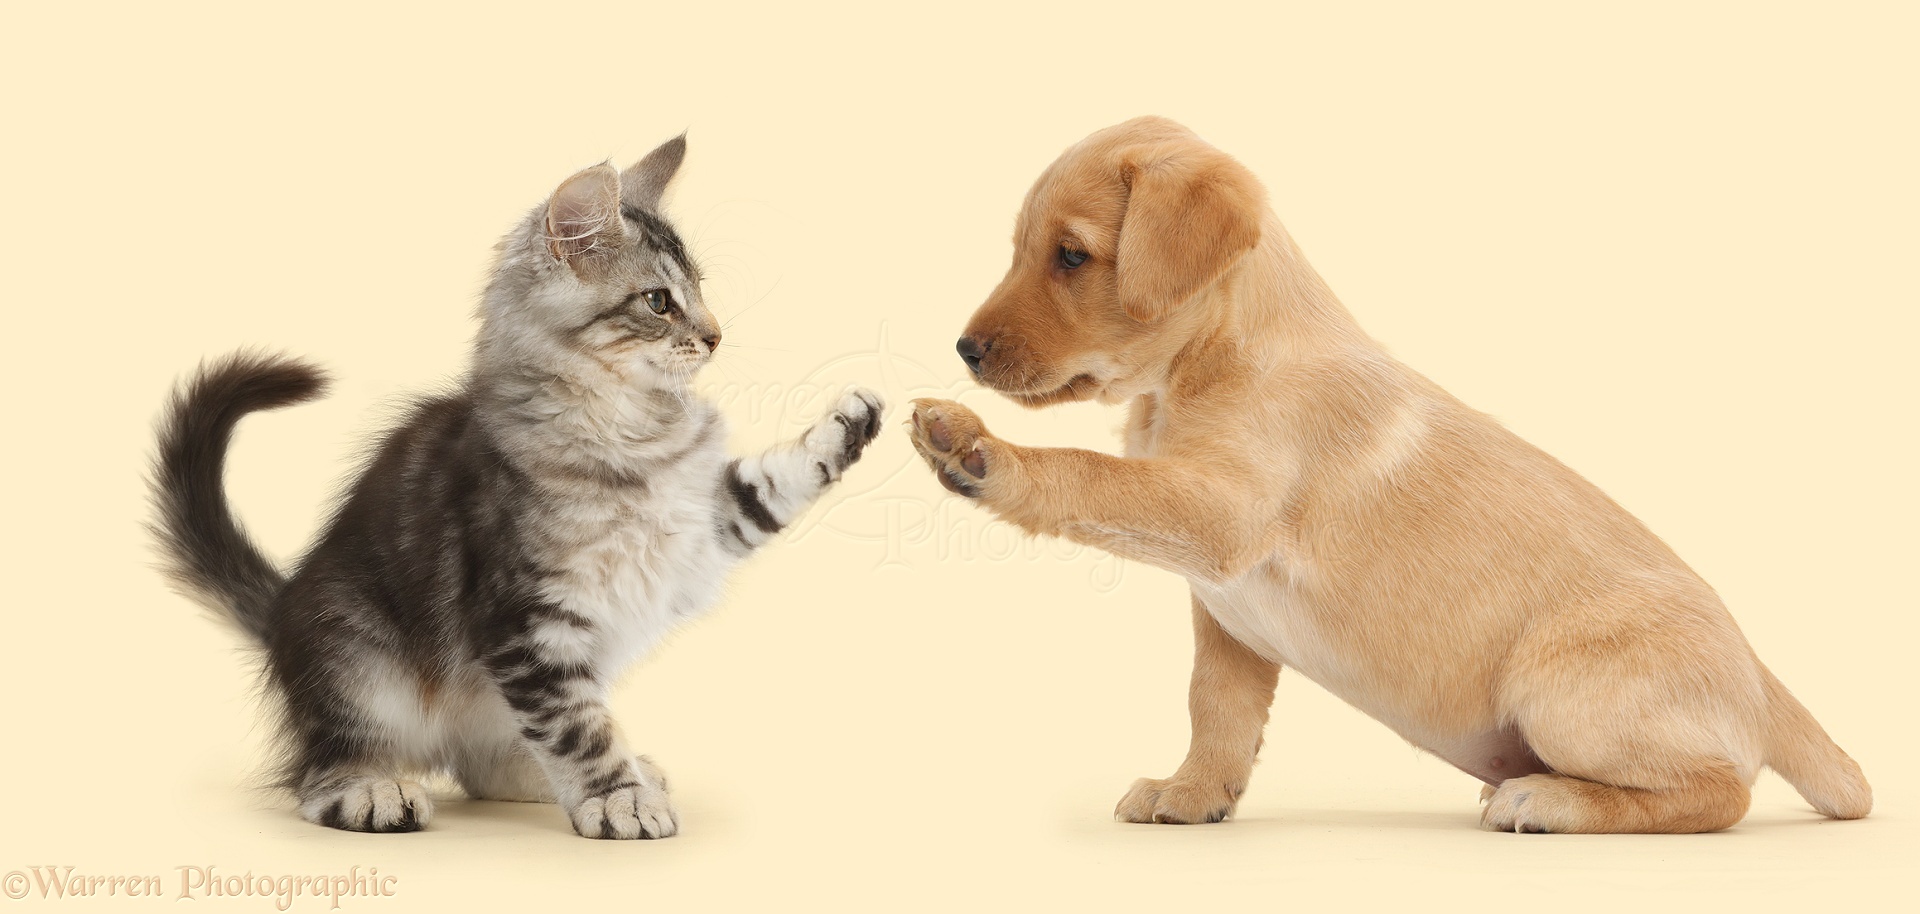 42998-Silver-tabby-kitten-and-Yellow-Labrador-puppy-high-five-white-background.jpg